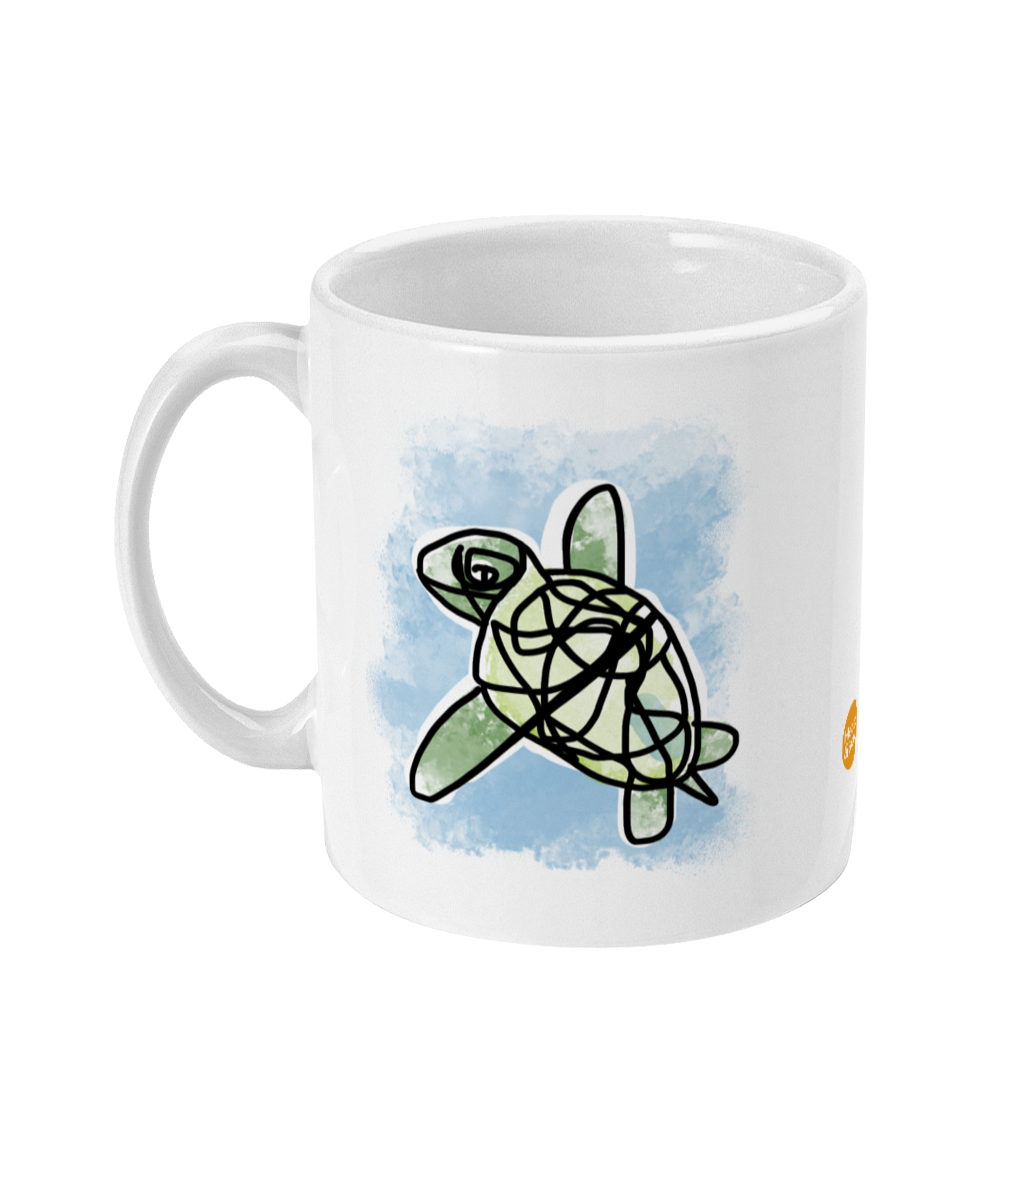 Myrtle the green Sea Turtle illustrated ceramic coffee mug by Hector and Bone Left View